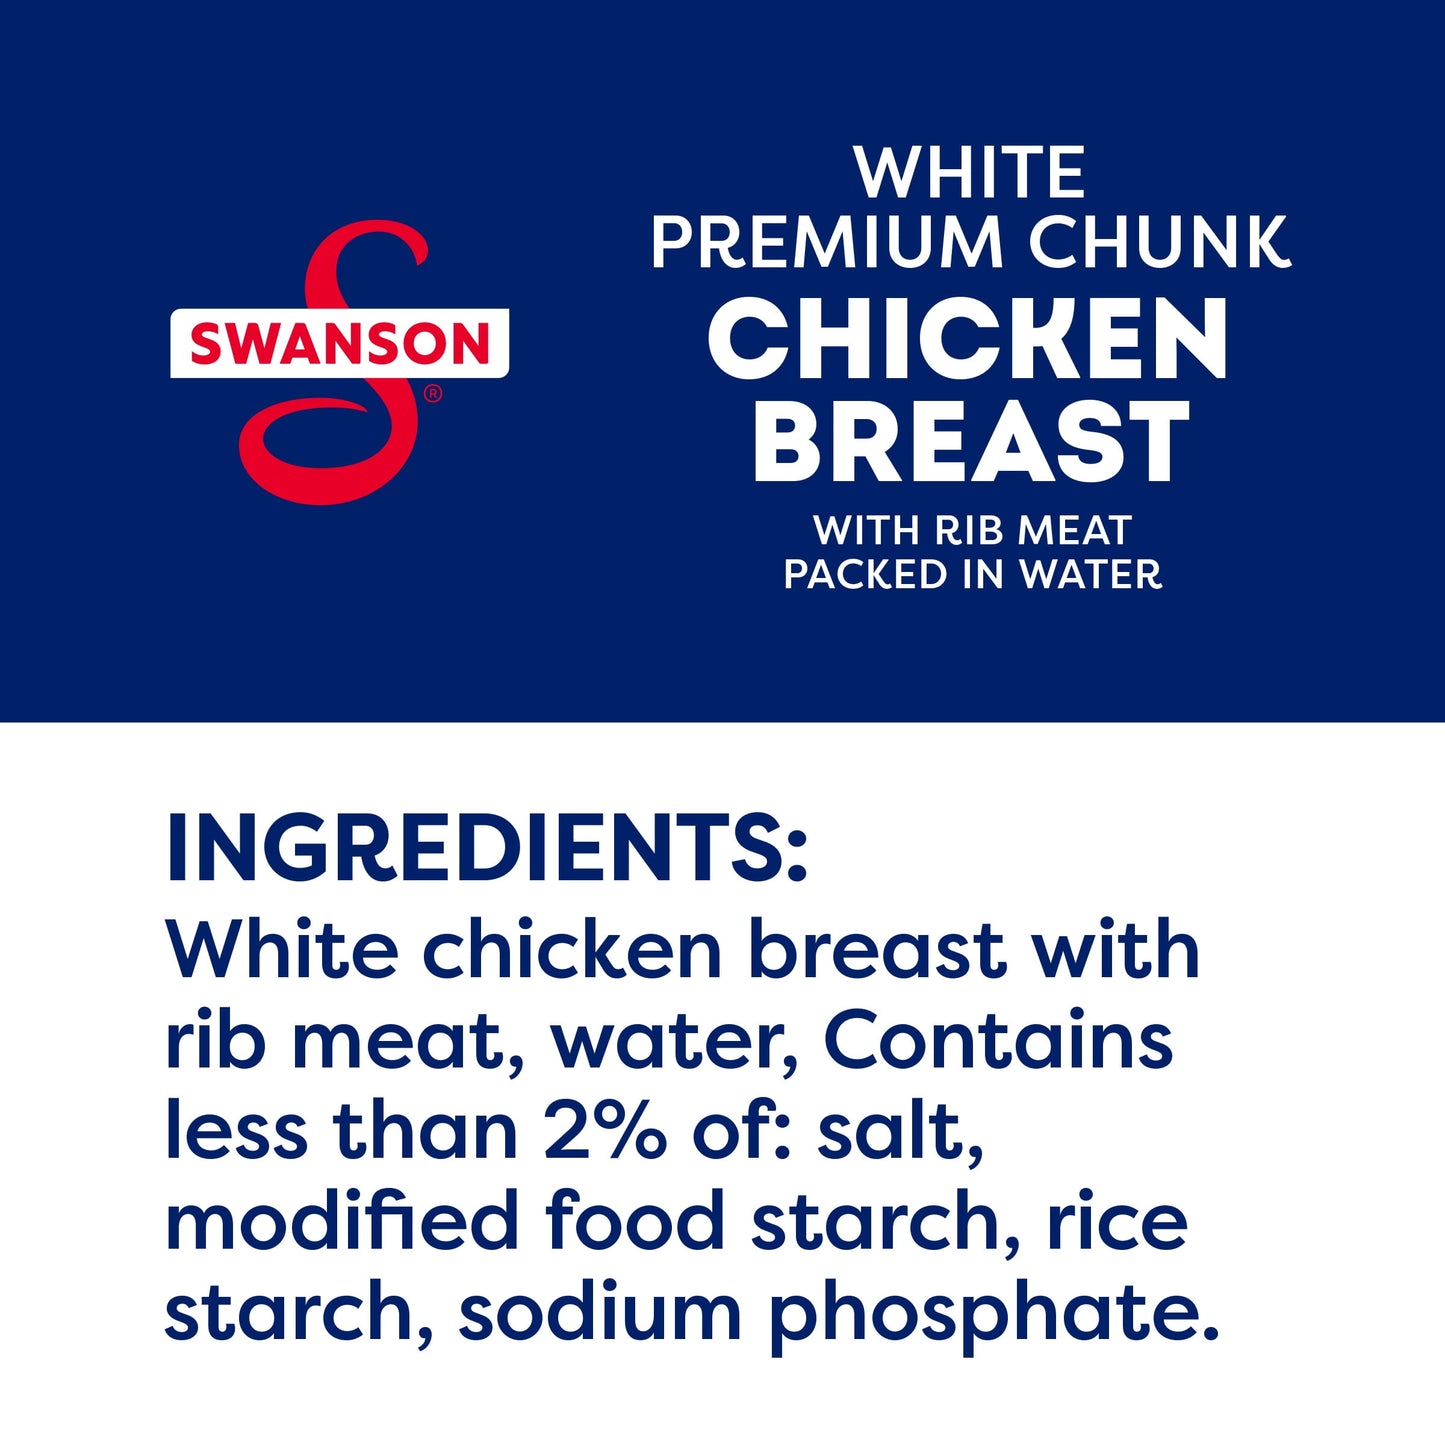 Swanson White Premium Chunk Canned Chicken Breast in Water, Fully Cooked Chicken, 12.5 oz Can